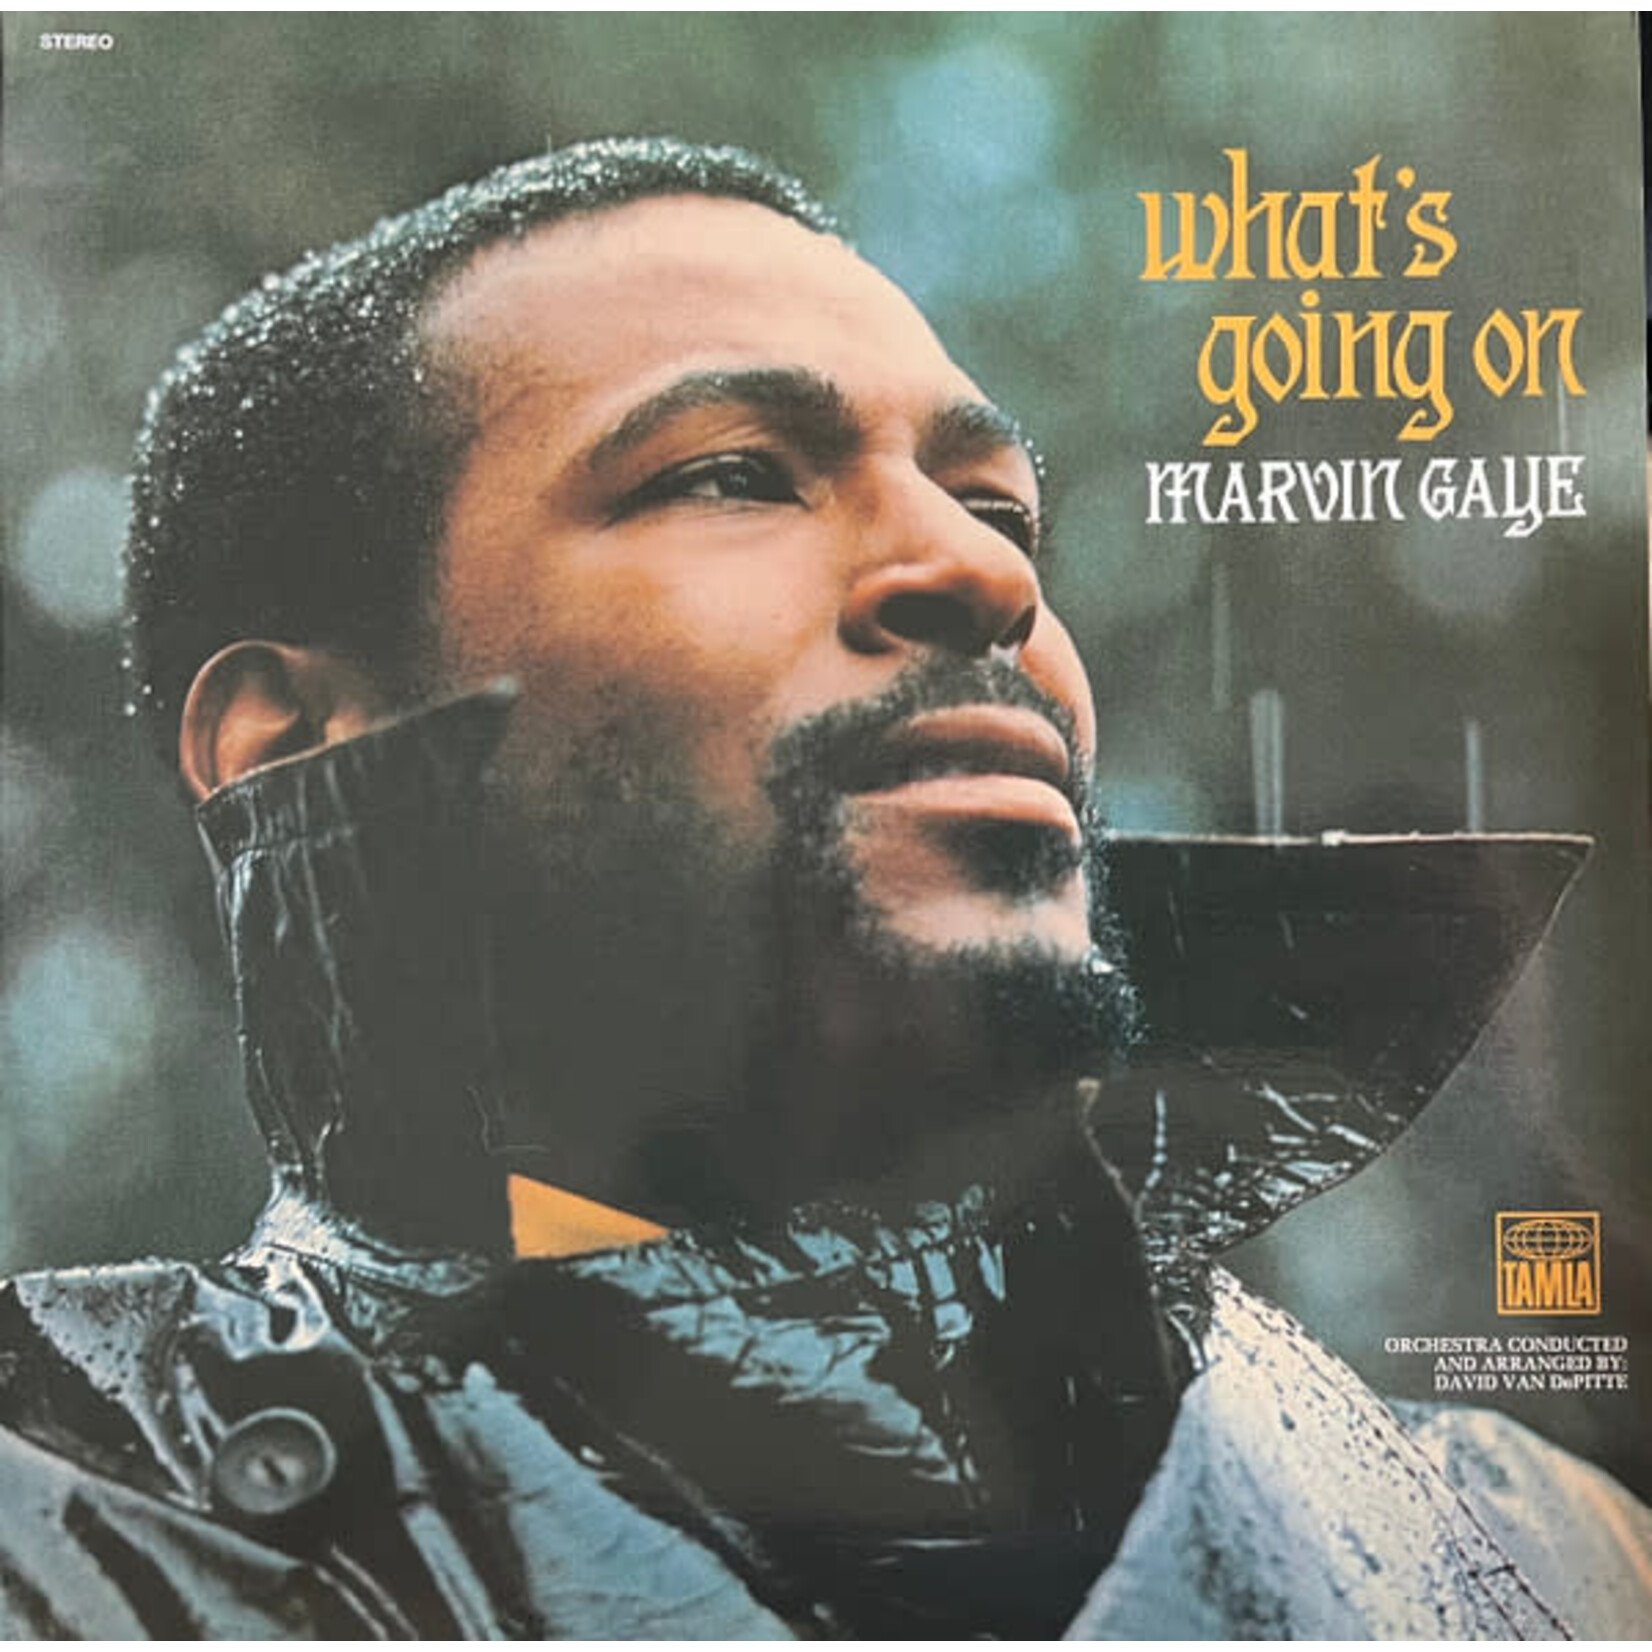 [New] Gaye, Marvin: What's Going On - 50th Anniversary (2LP, limited  edition w/lithos) [UME]